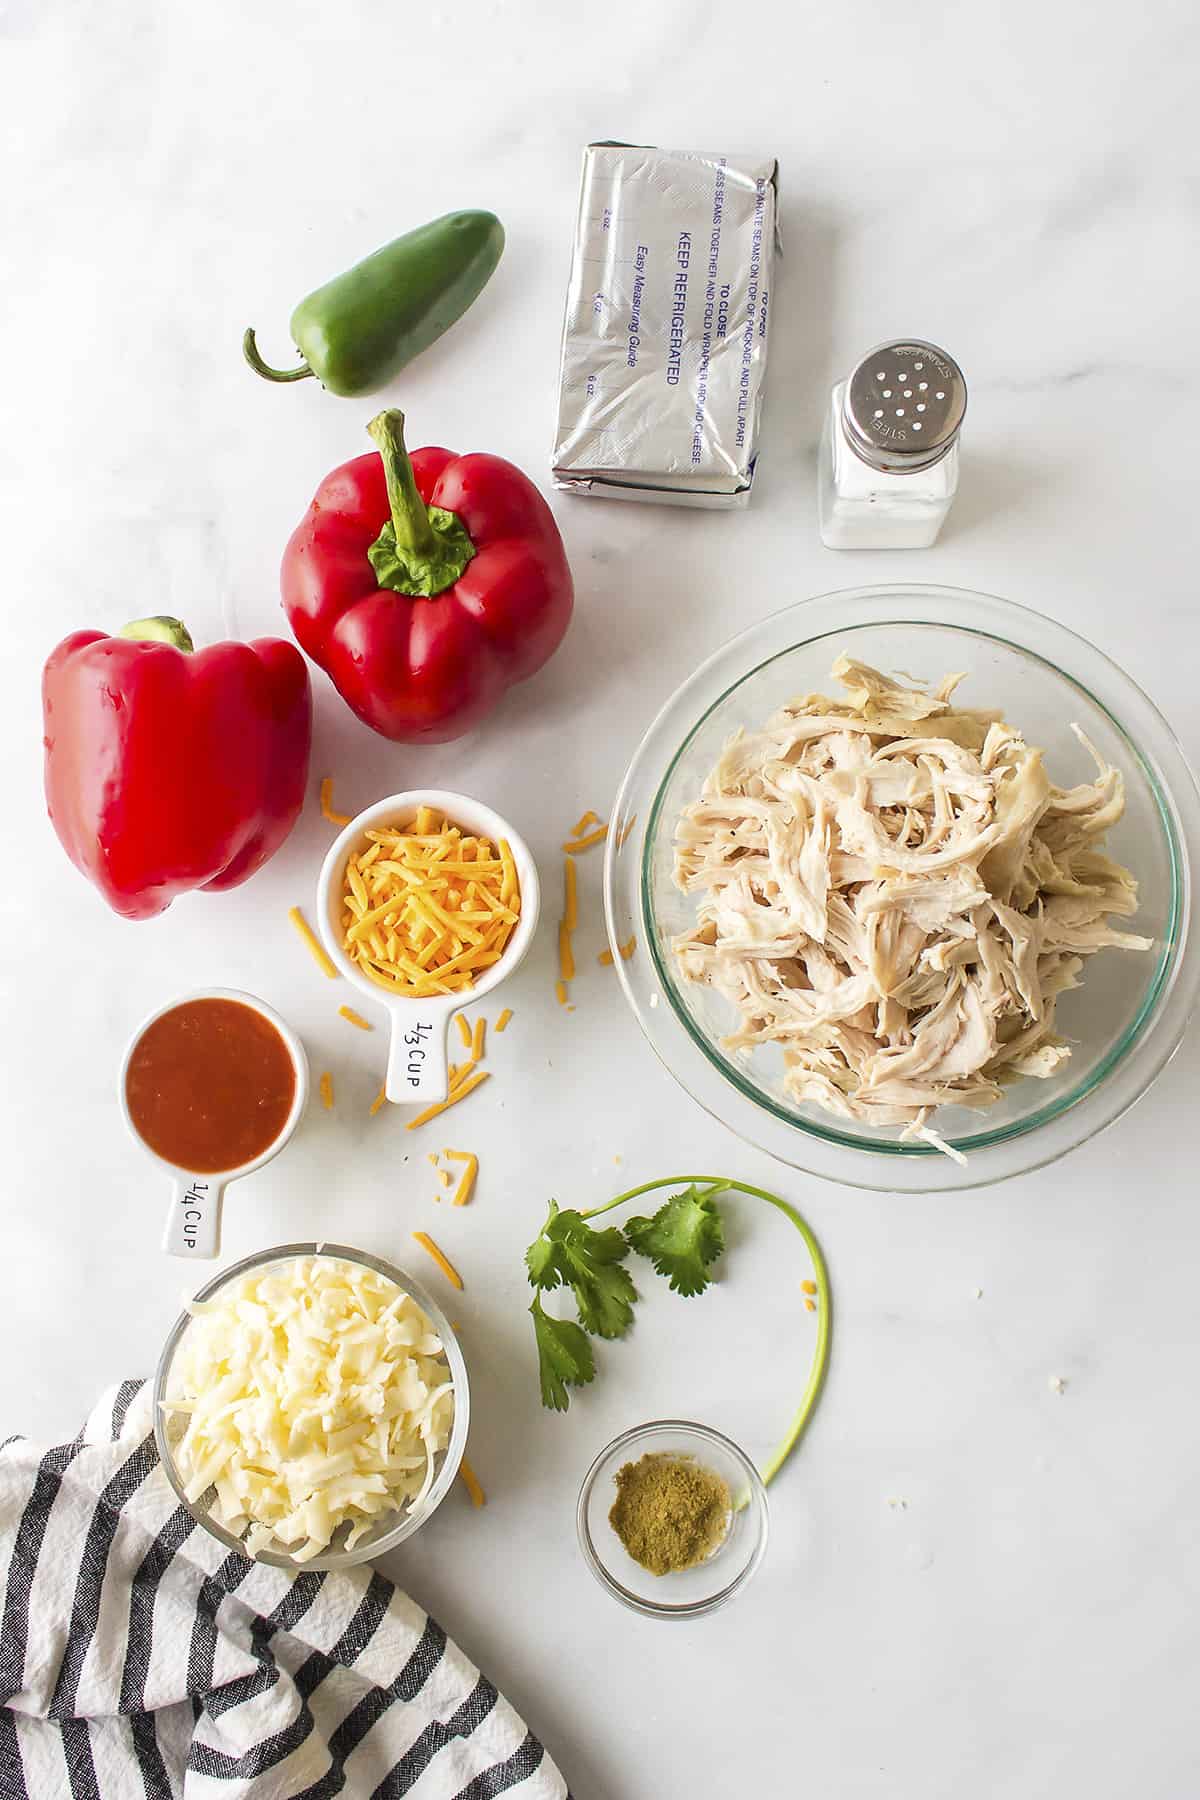 Ingredients for chicken stuffed peppers.